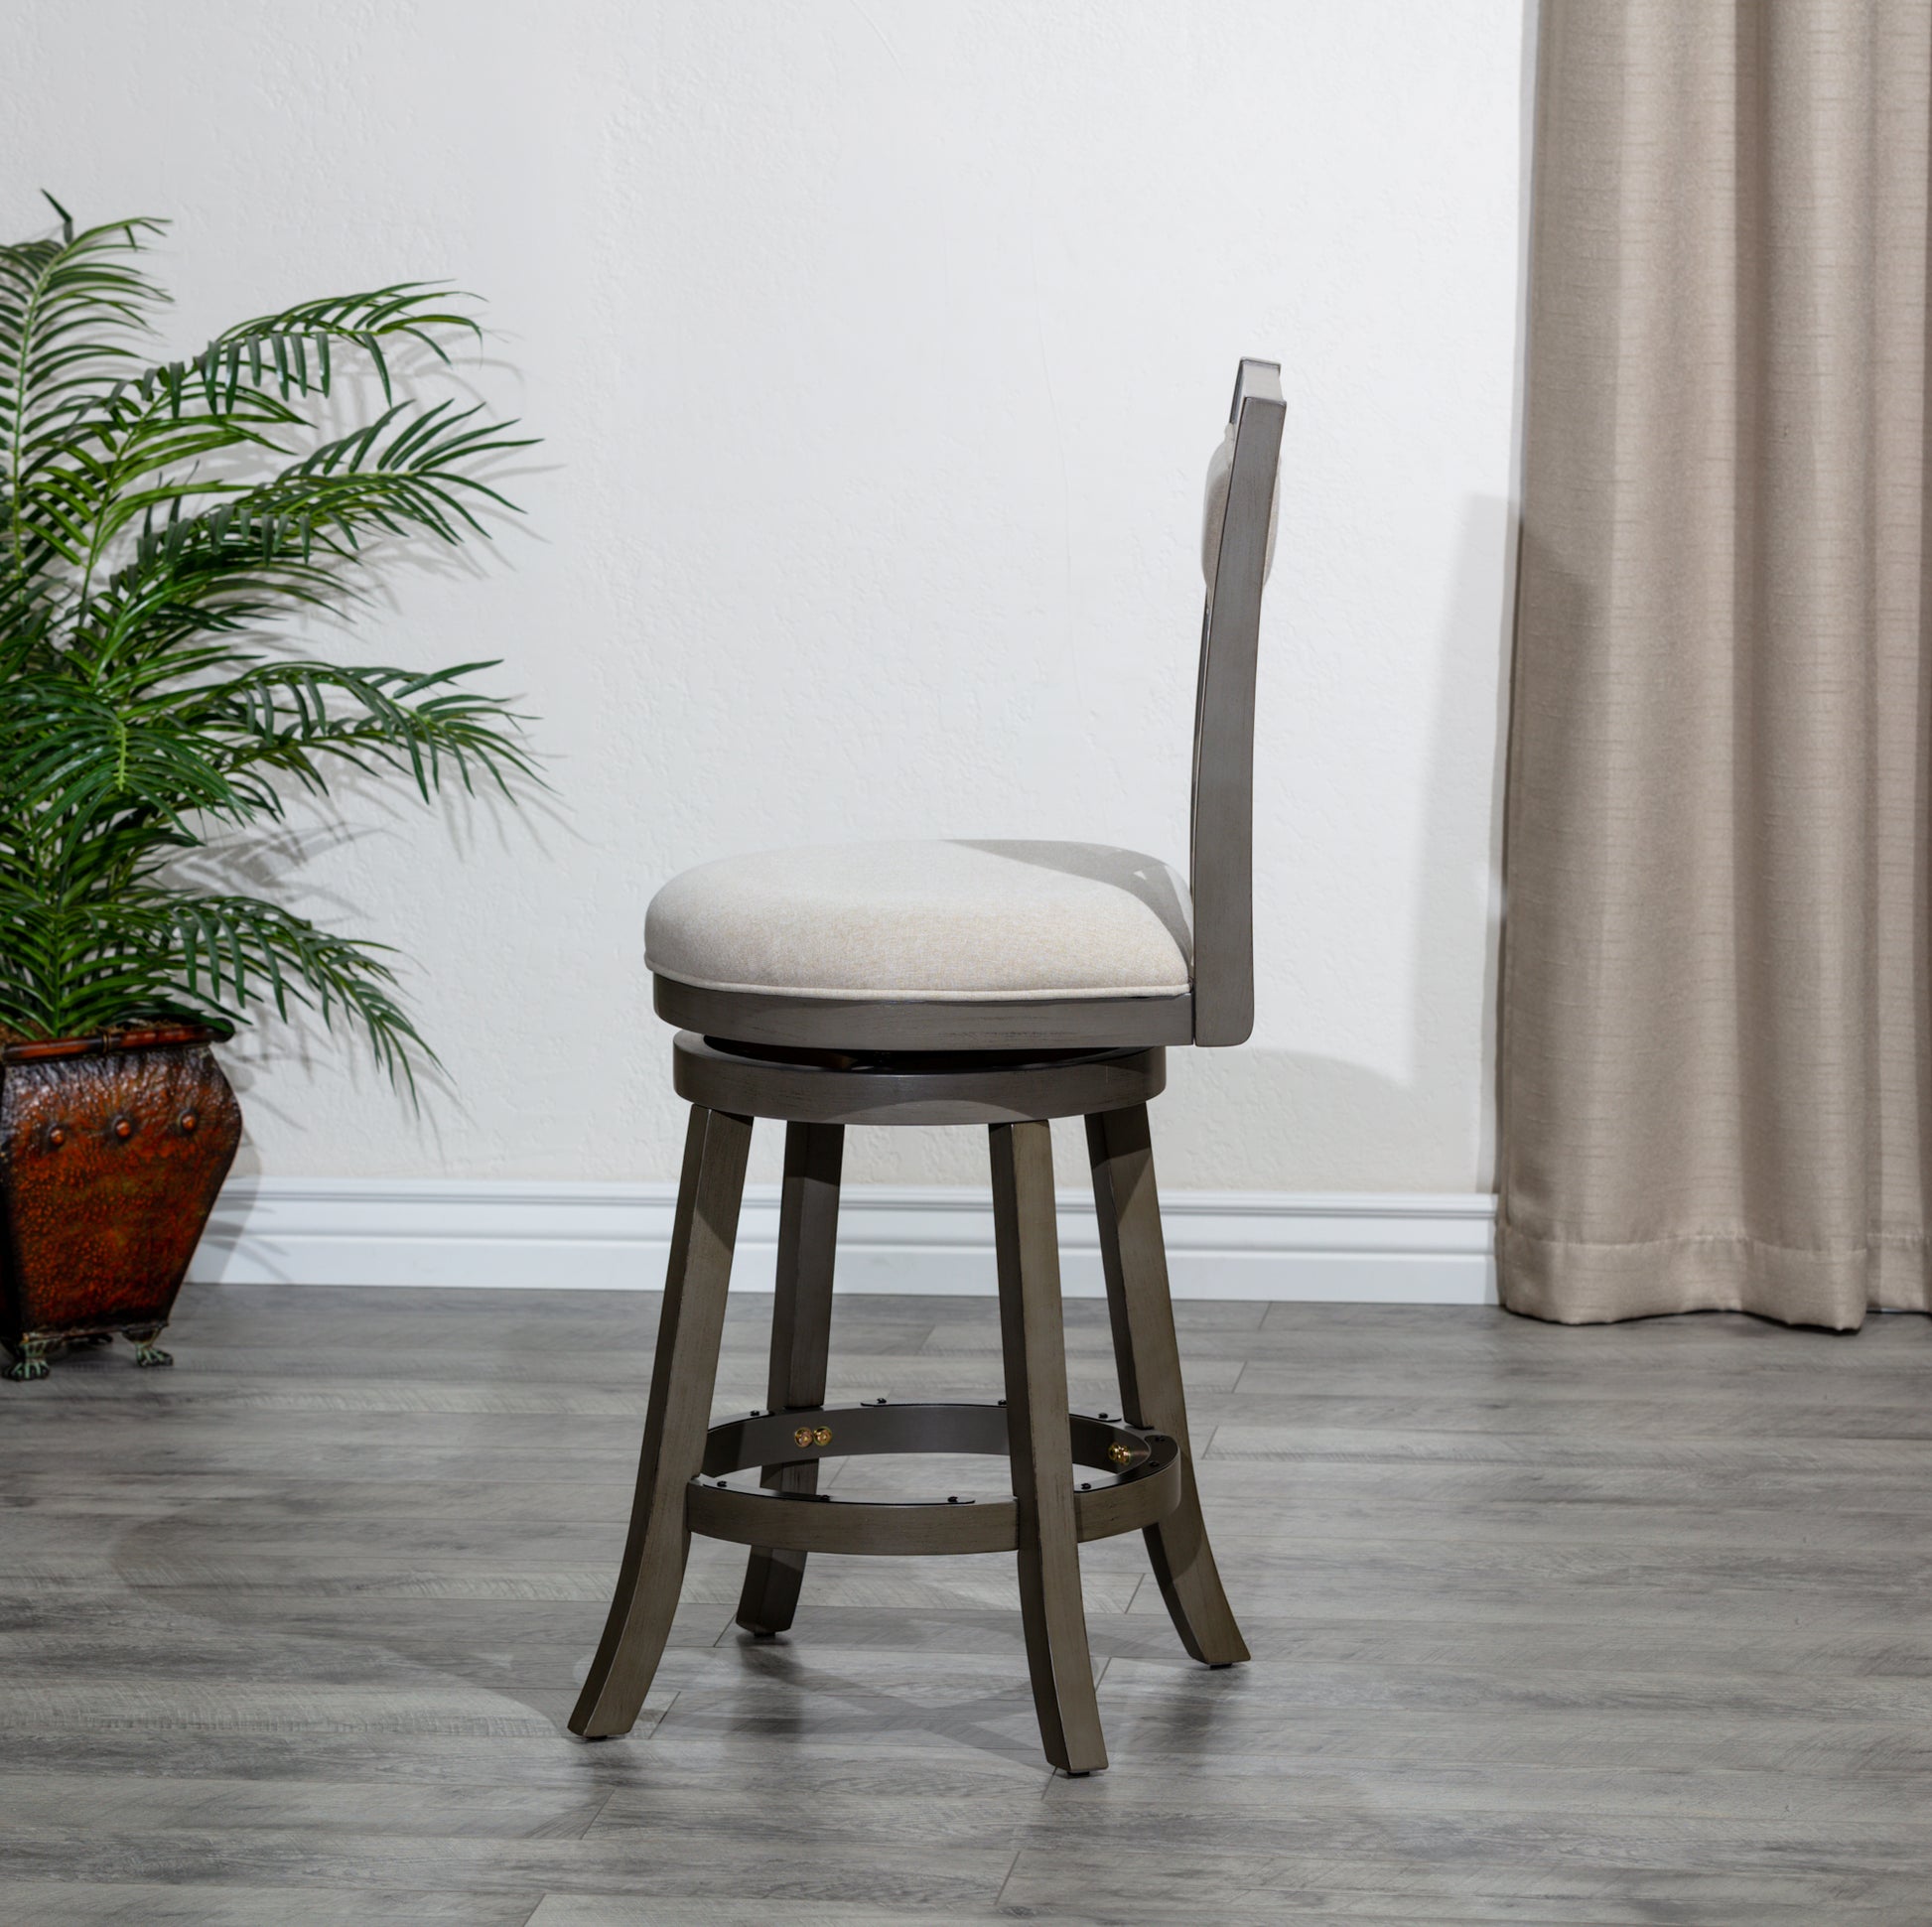 DTY Home 30" Swivel Bar Stool in Weathered Gray with Beige Fabric Seat